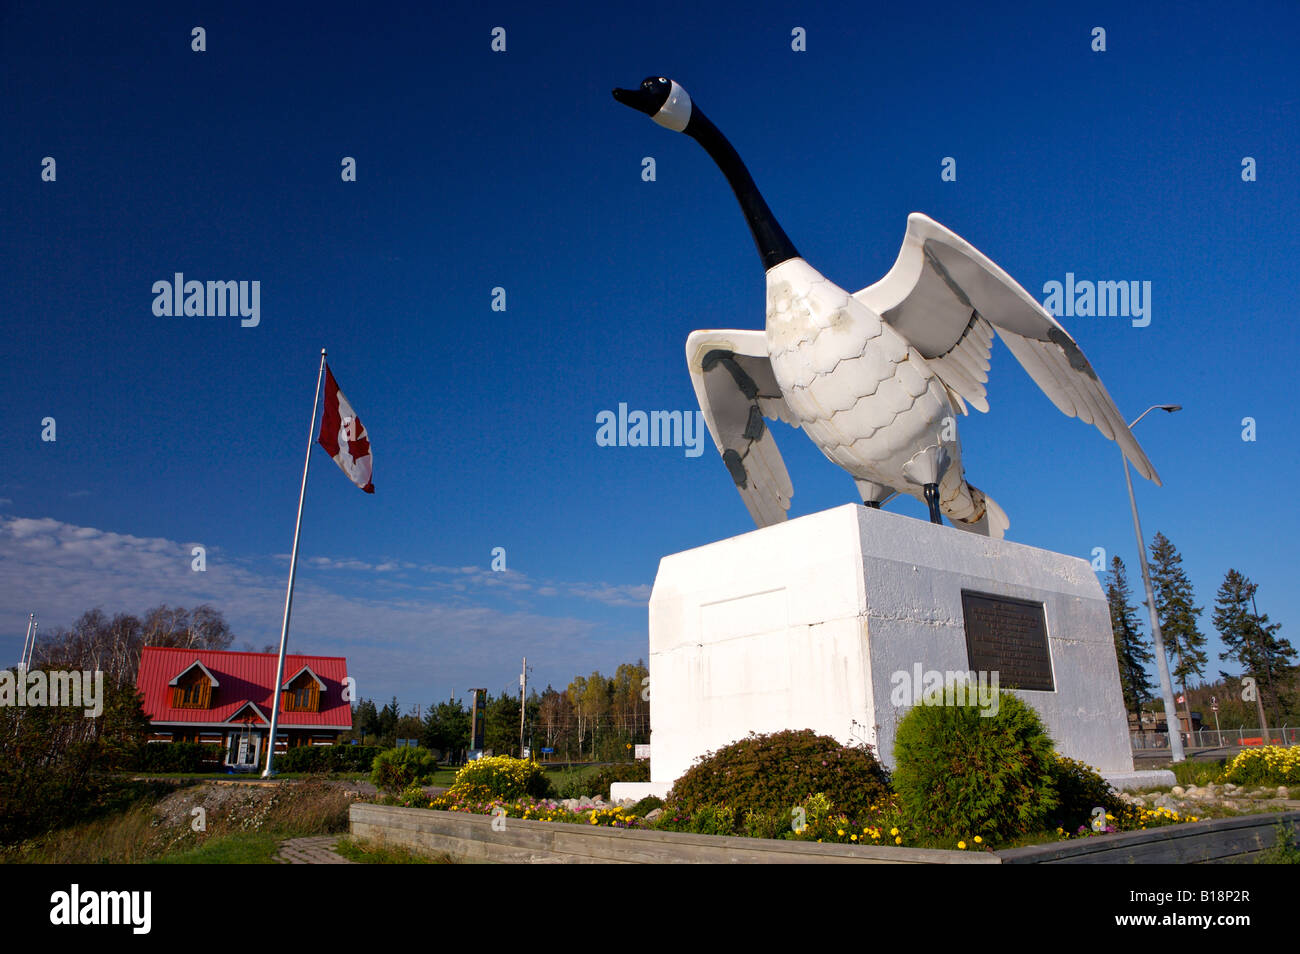 Statue of Canadian Goose at the Information Centre in the town of Wawa, Ontario, Canada. Stock Photo